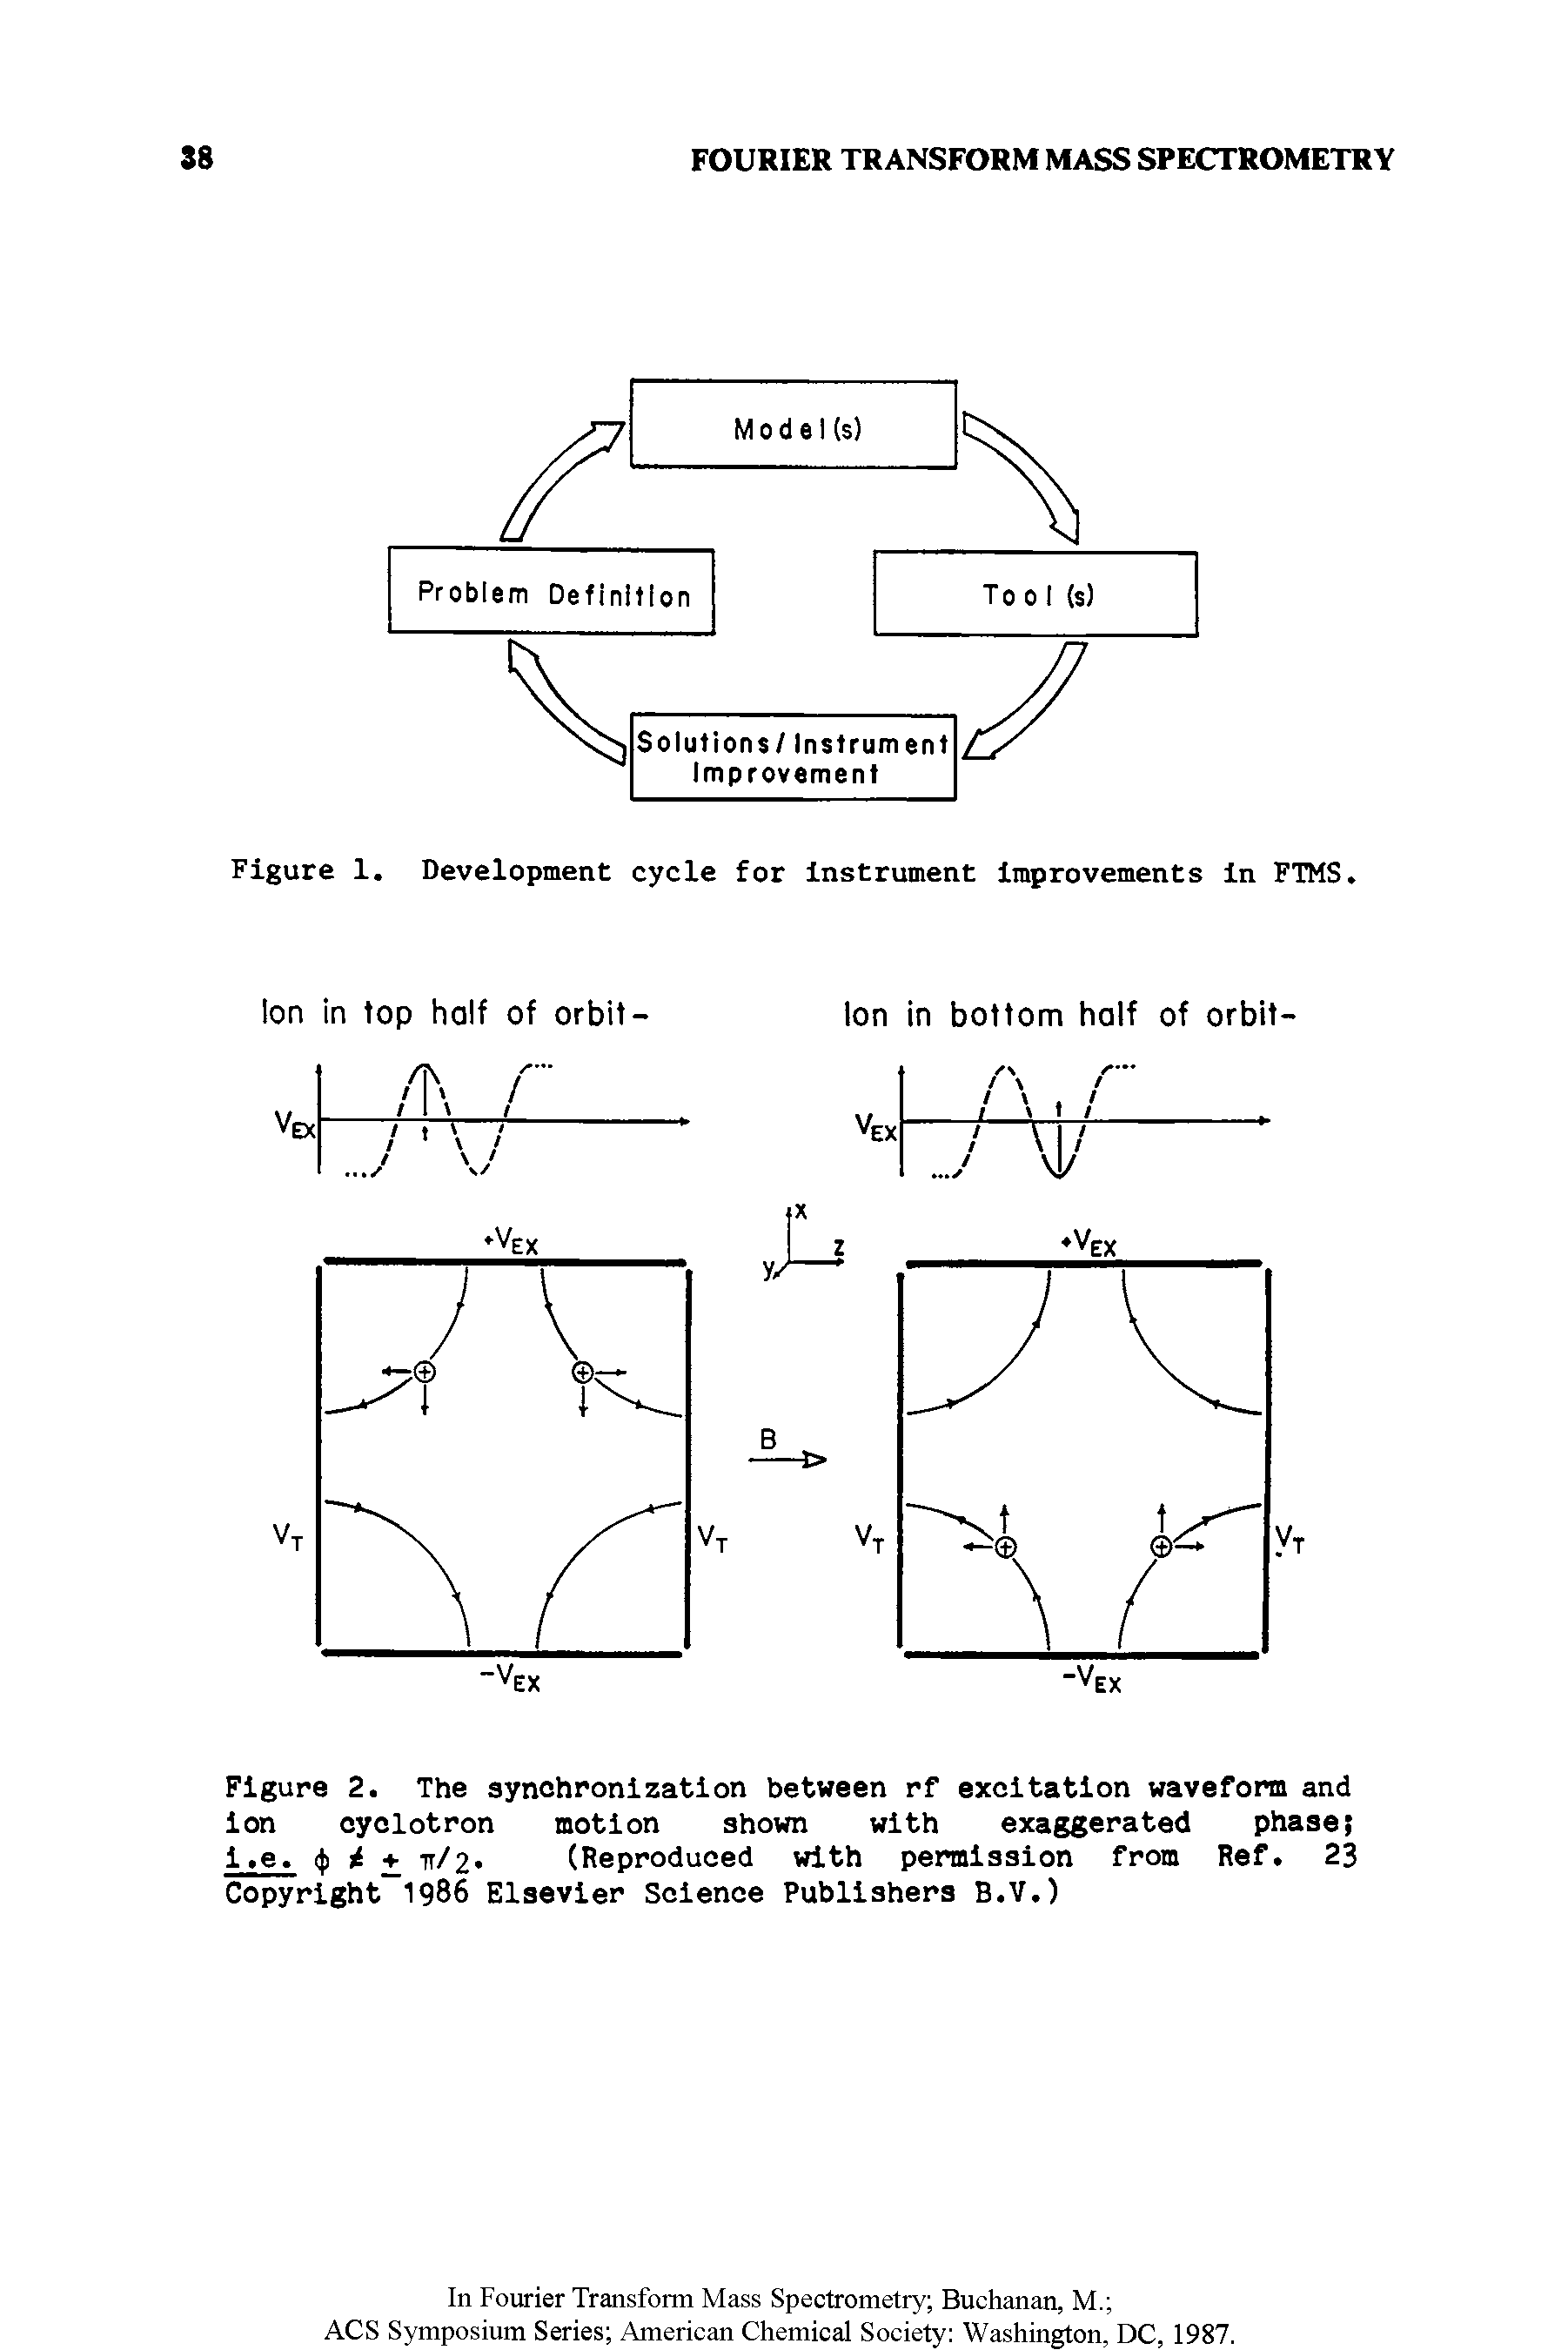 Figure 2. The synchronization between rf excitation waveform and ion cyclotron motion shown with exaggerated phase 1, e. i + it/2 (Reproduced with permission from Ref. 23 Copyright 1986 Elsevier Science Publishers B.V.)...